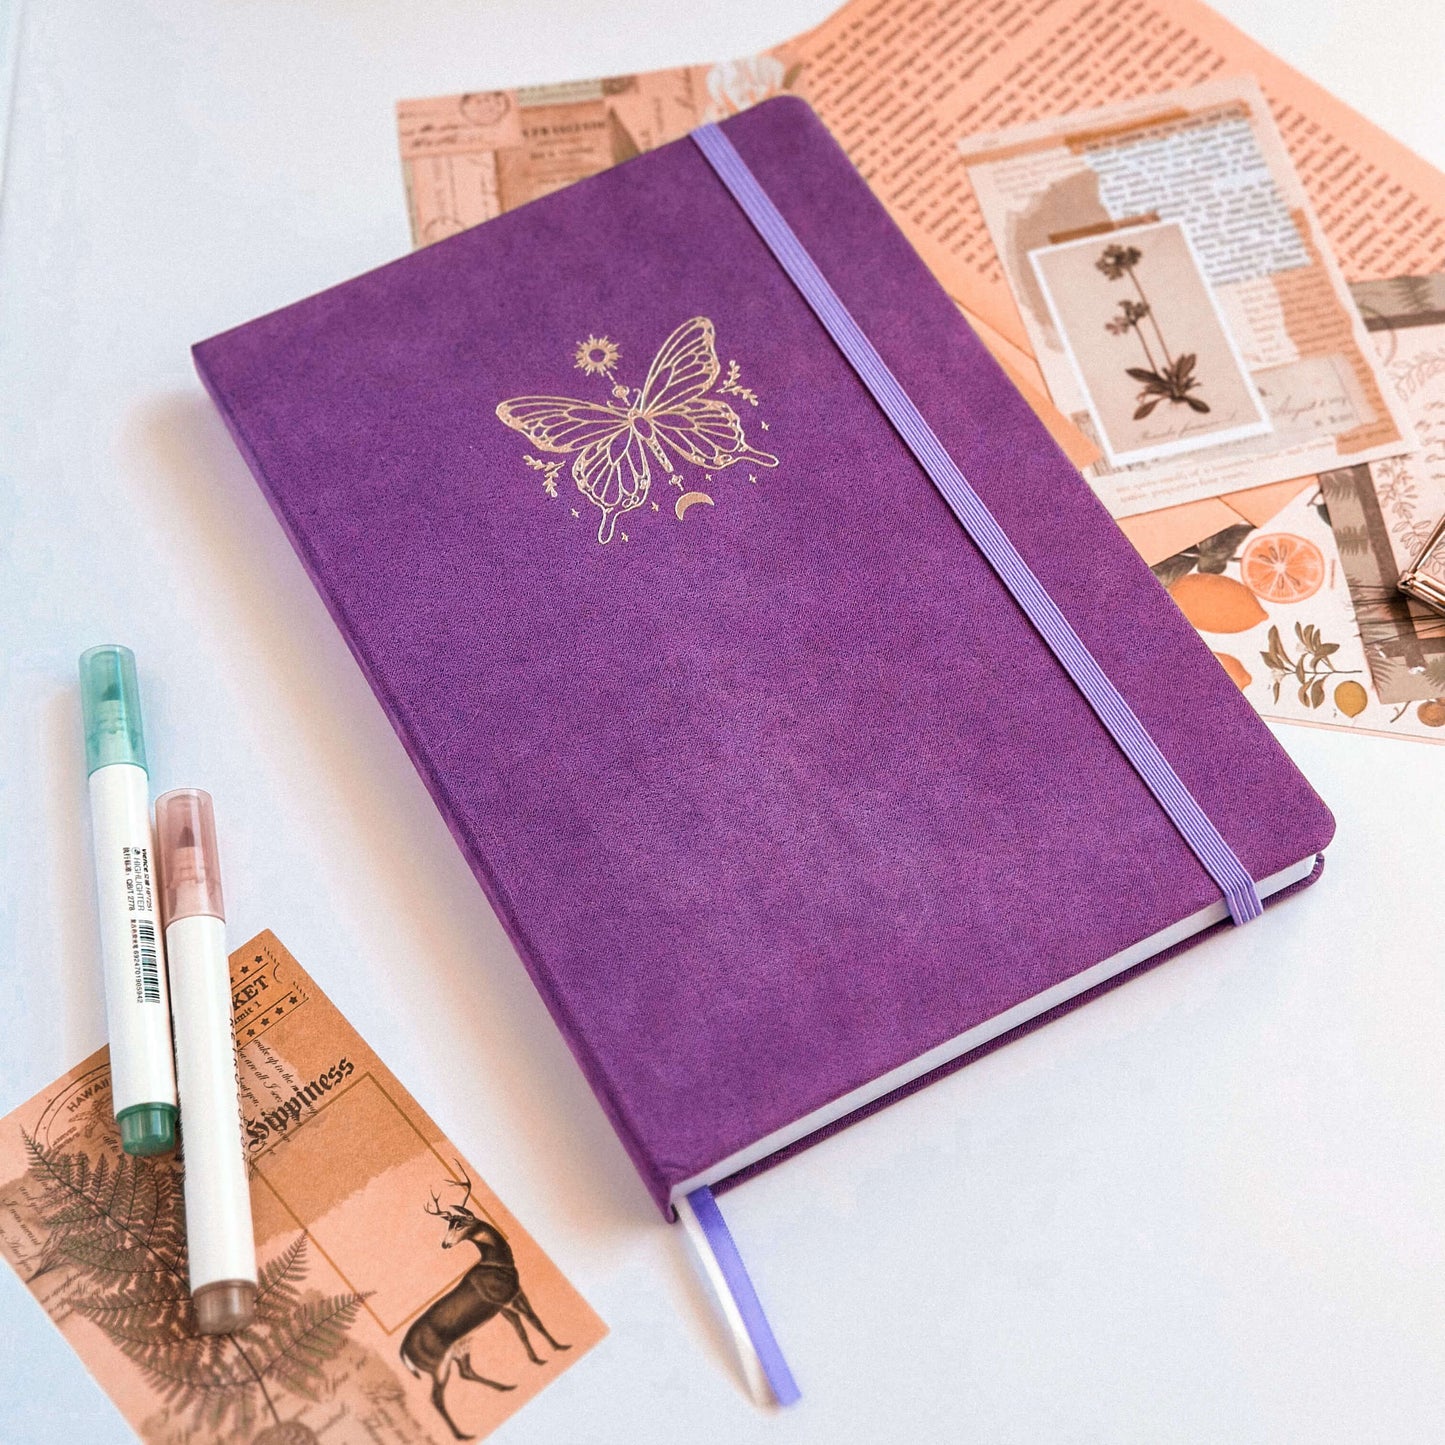 Less than perfect Majestic butterfly dotted journal - B5